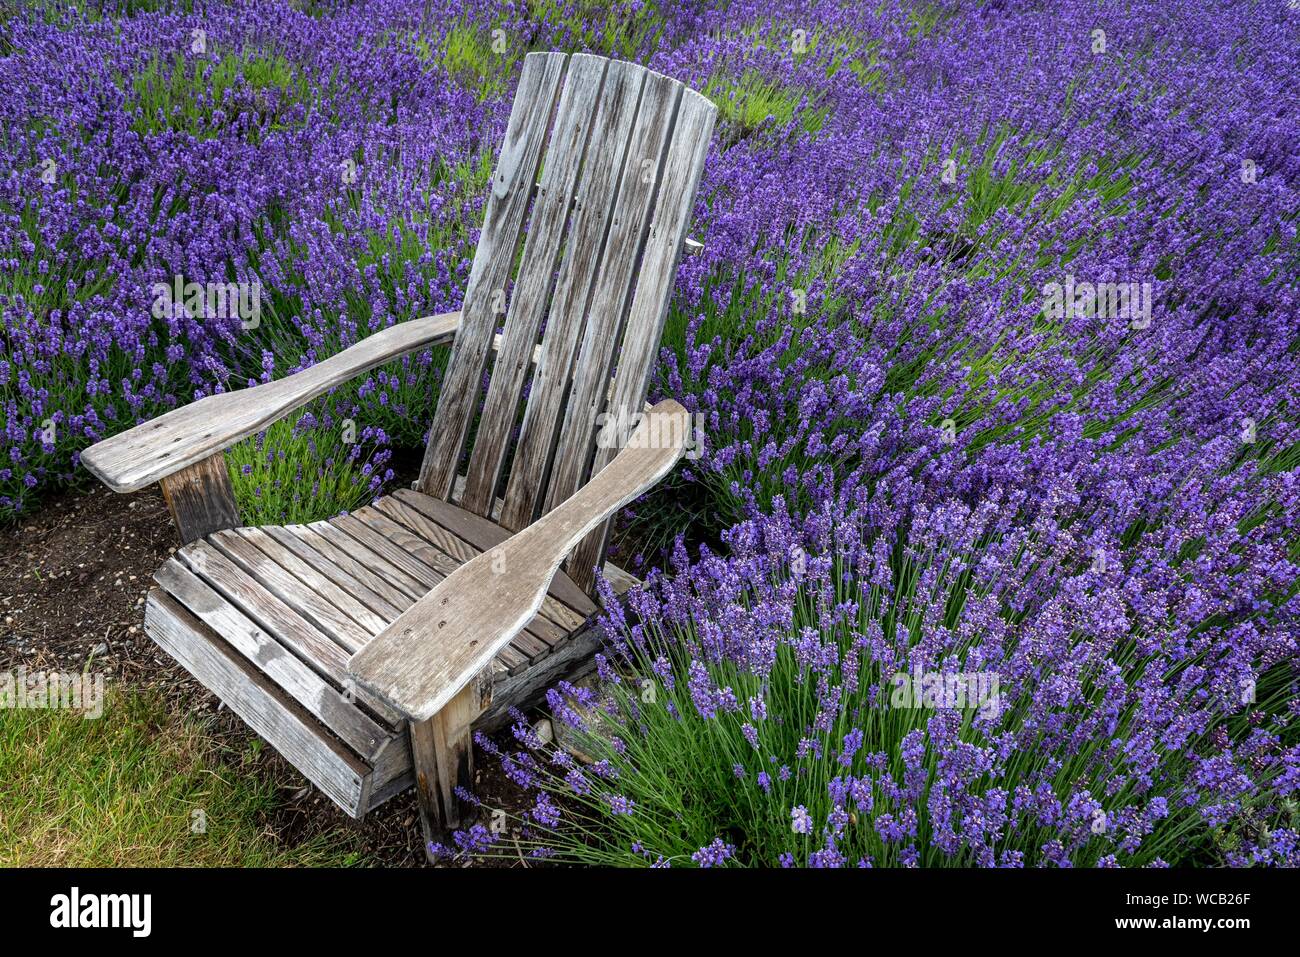 Classic Adirondack style chair in a colorful lavender field. Stock Photo